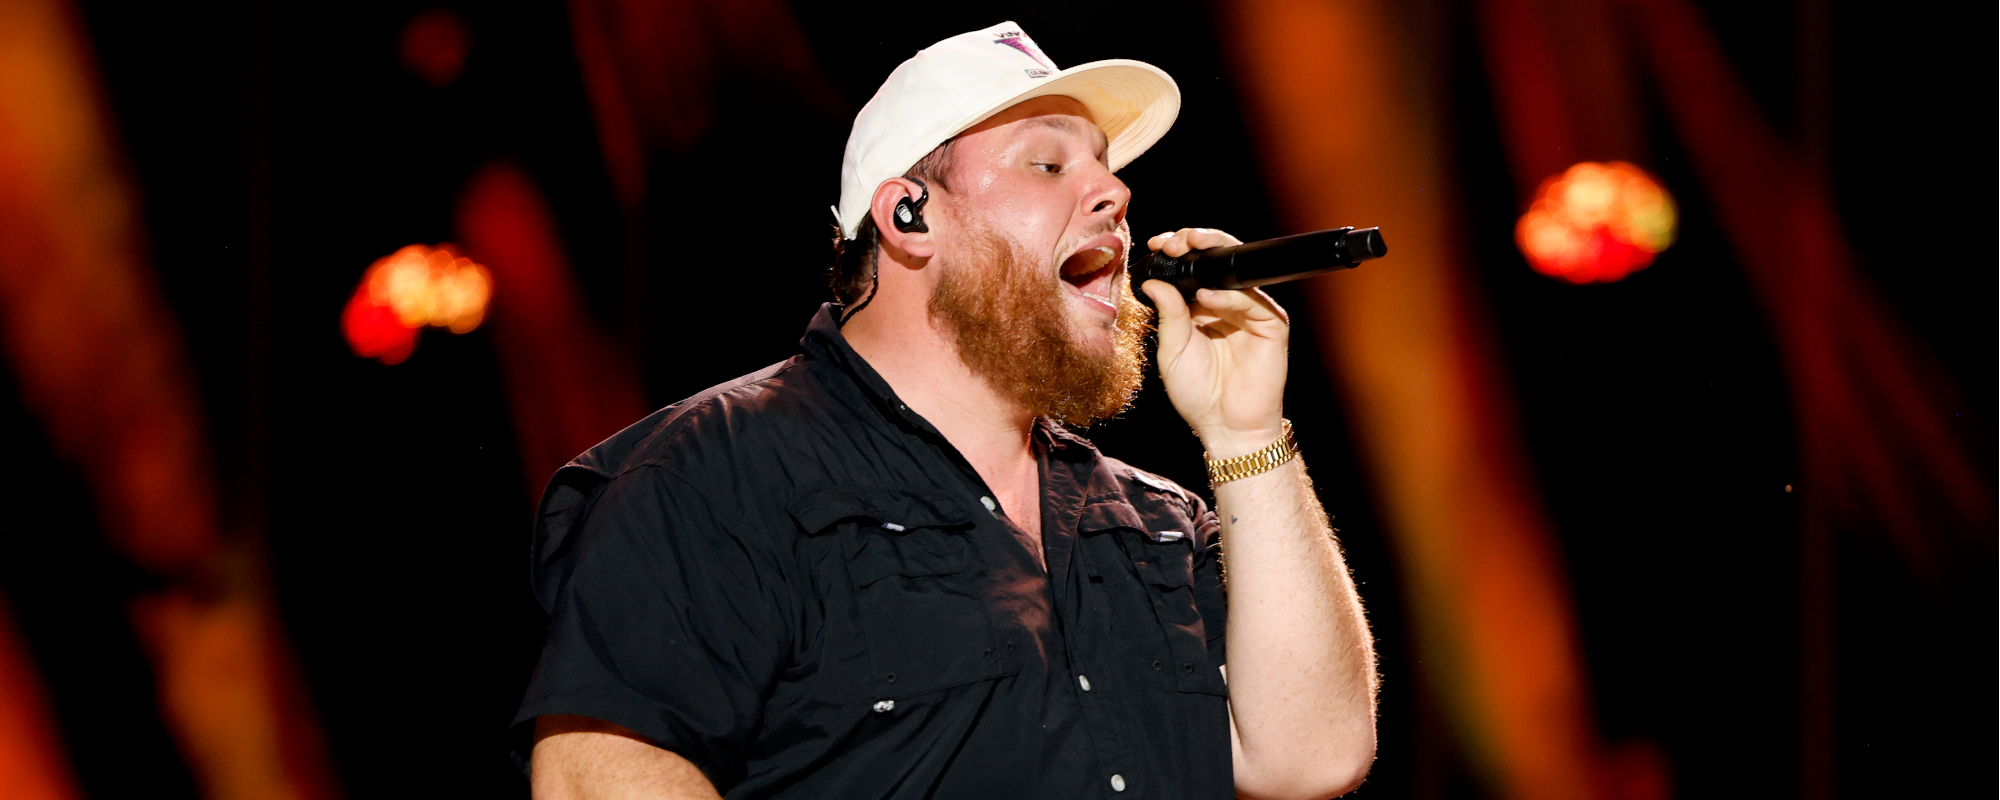 Florida Woman Ordered To Pay Luke Combs $250,000 for Selling $380 Worth of Homemade Tumblers